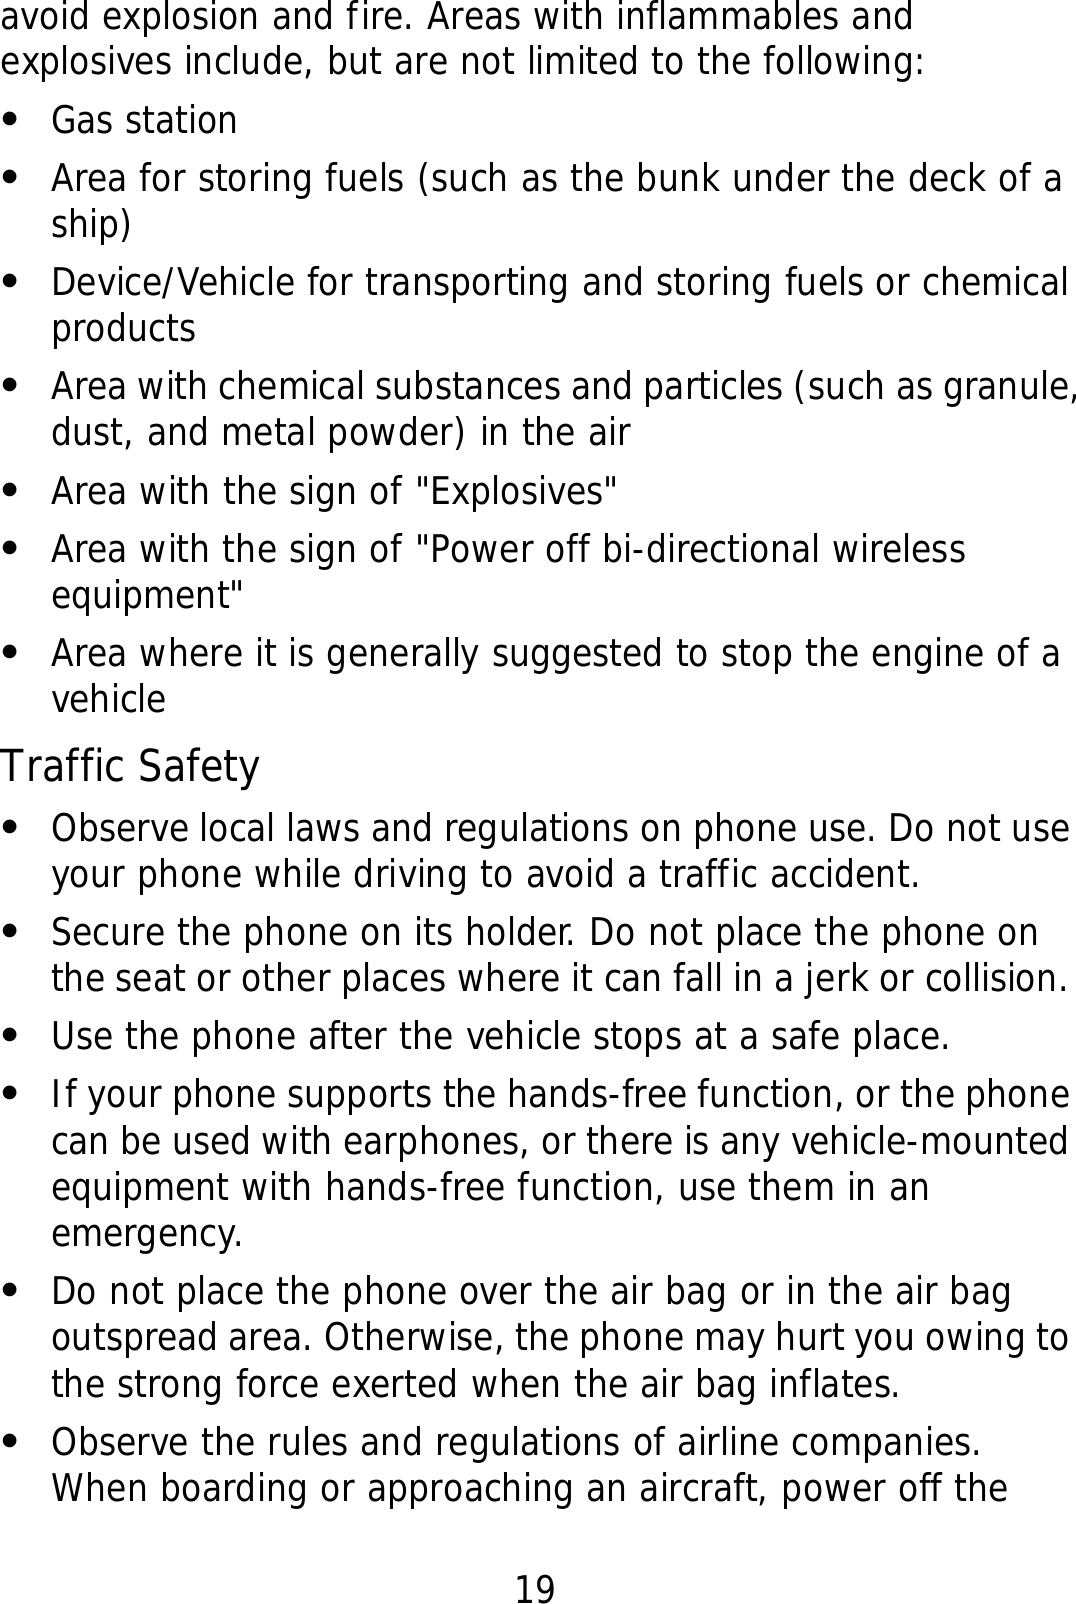 19 avoid explosion and fire. Areas with inflammables and explosives include, but are not limited to the following: z Gas station z Area for storing fuels (such as the bunk under the deck of a ship) z Device/Vehicle for transporting and storing fuels or chemical products z Area with chemical substances and particles (such as granule, dust, and metal powder) in the air z Area with the sign of &quot;Explosives&quot; z Area with the sign of &quot;Power off bi-directional wireless equipment&quot; z Area where it is generally suggested to stop the engine of a vehicle Traffic Safety z Observe local laws and regulations on phone use. Do not use your phone while driving to avoid a traffic accident. z Secure the phone on its holder. Do not place the phone on the seat or other places where it can fall in a jerk or collision. z Use the phone after the vehicle stops at a safe place. z If your phone supports the hands-free function, or the phone can be used with earphones, or there is any vehicle-mounted equipment with hands-free function, use them in an emergency. z Do not place the phone over the air bag or in the air bag outspread area. Otherwise, the phone may hurt you owing to the strong force exerted when the air bag inflates. z Observe the rules and regulations of airline companies. When boarding or approaching an aircraft, power off the 